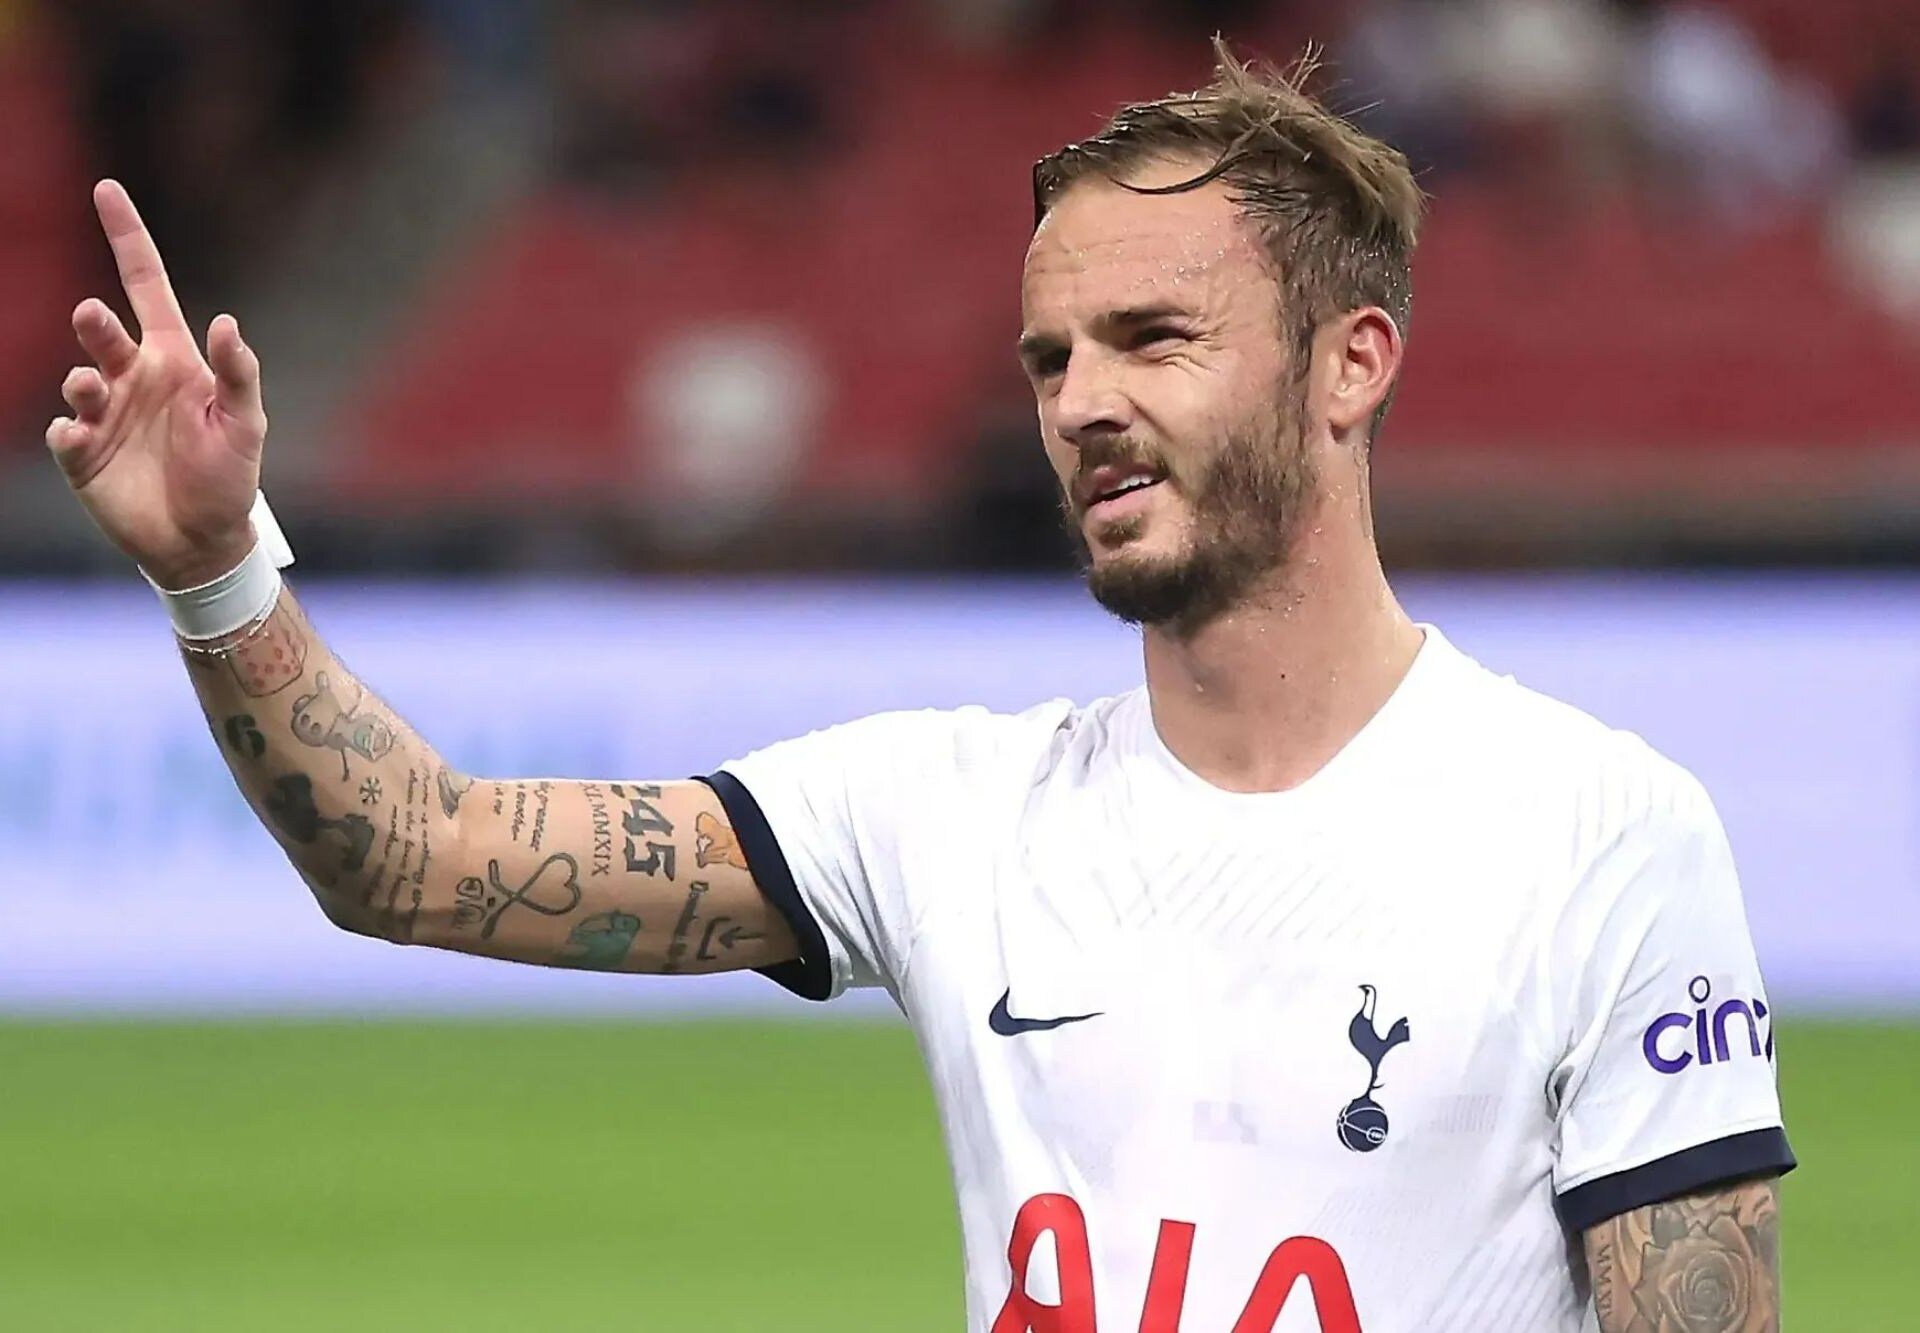 What Did Maddison Recently Mention Regarding Eriksen and Tottenham?